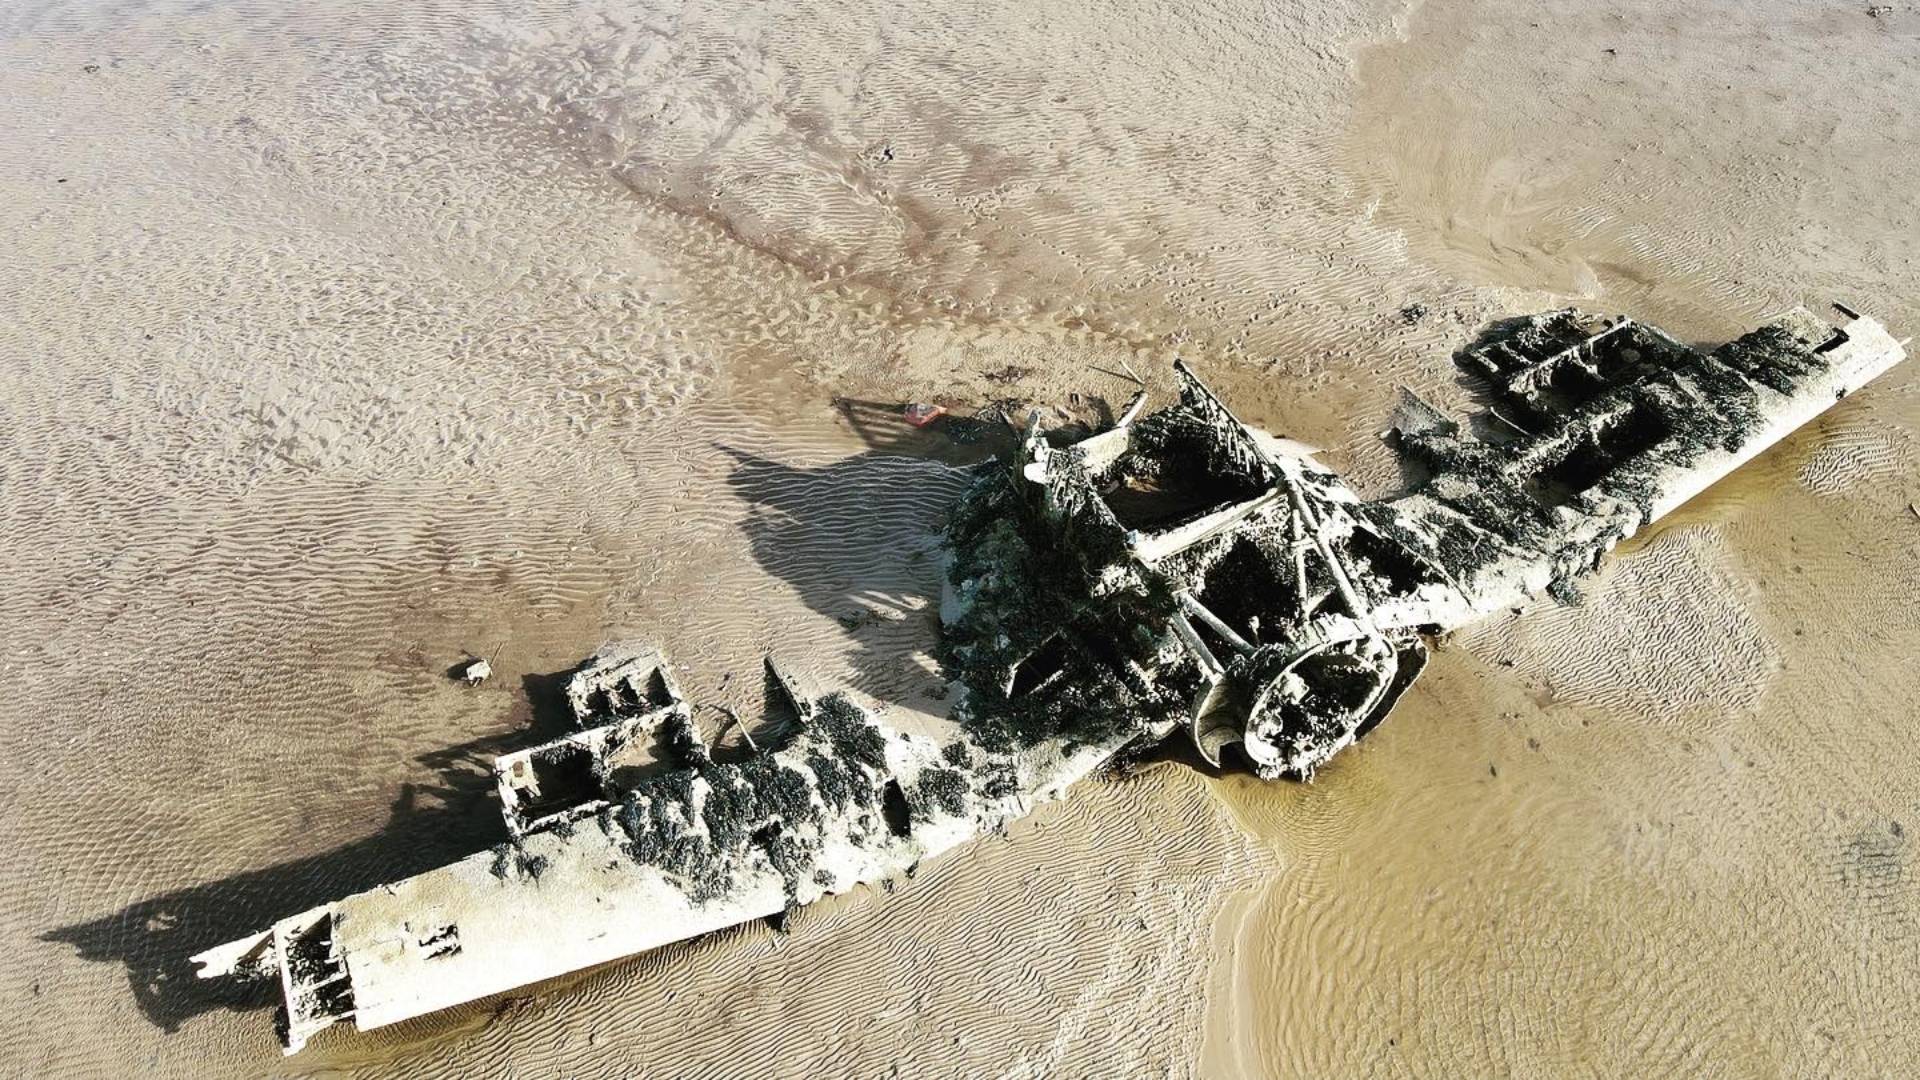 Wreckage of Vought F4U-1 Corsair R JT693 on the mudflats in Lough Foyle off the coast at Ballykelly, Co. Londonderry.